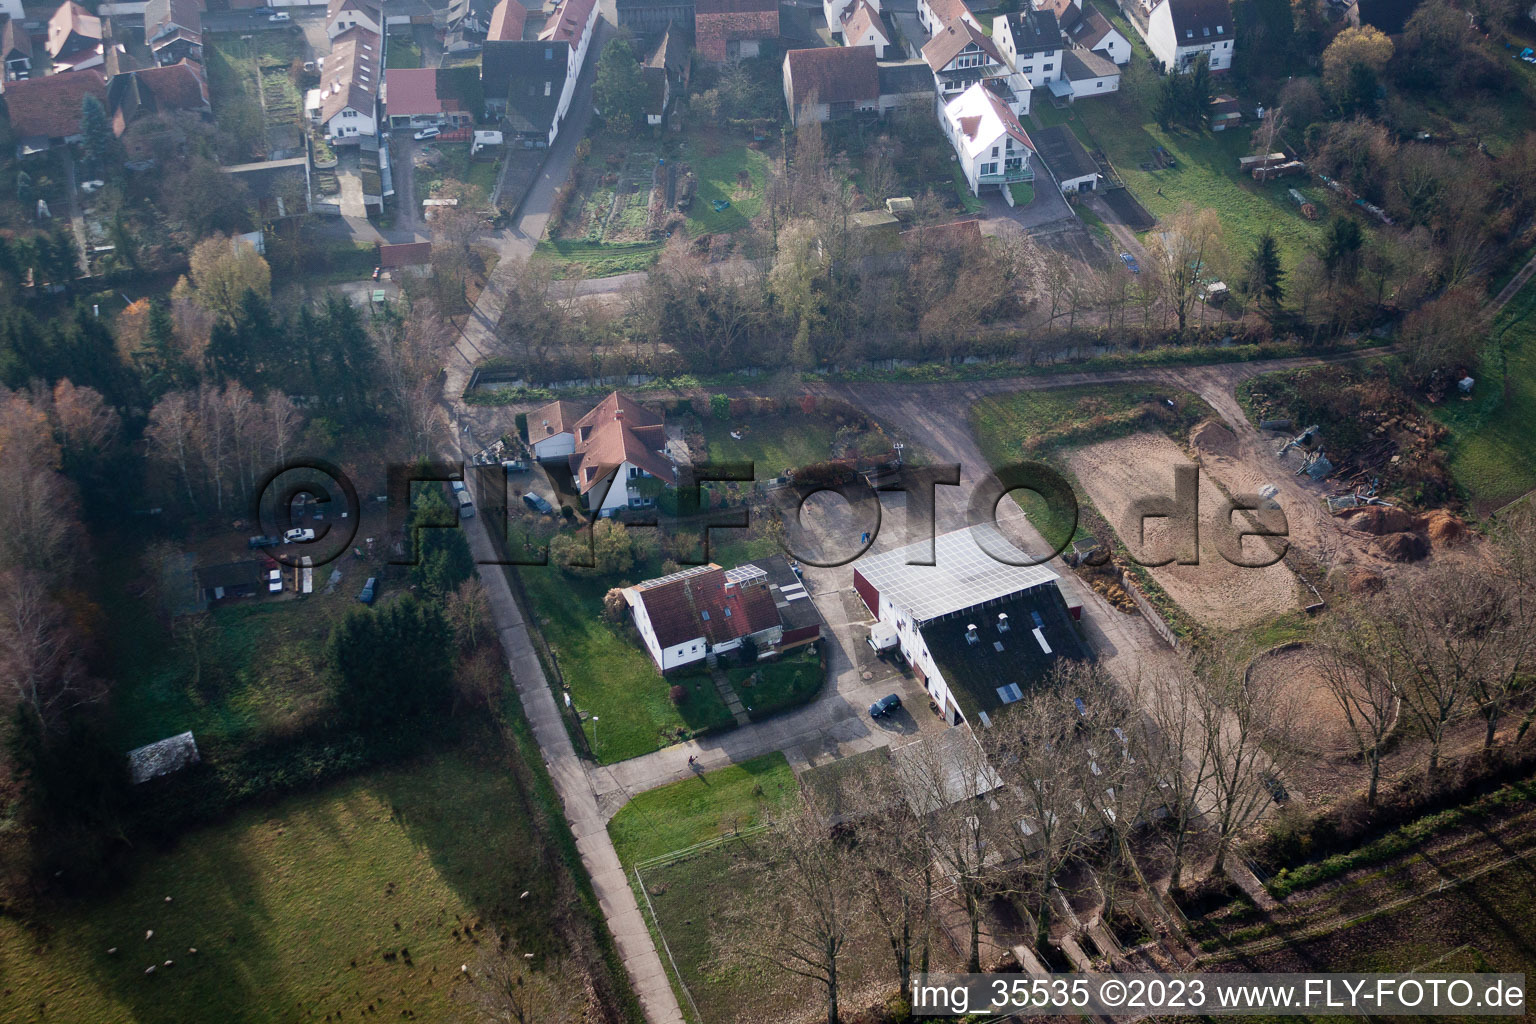 Bird's eye view of Washing mill in Winden in the state Rhineland-Palatinate, Germany